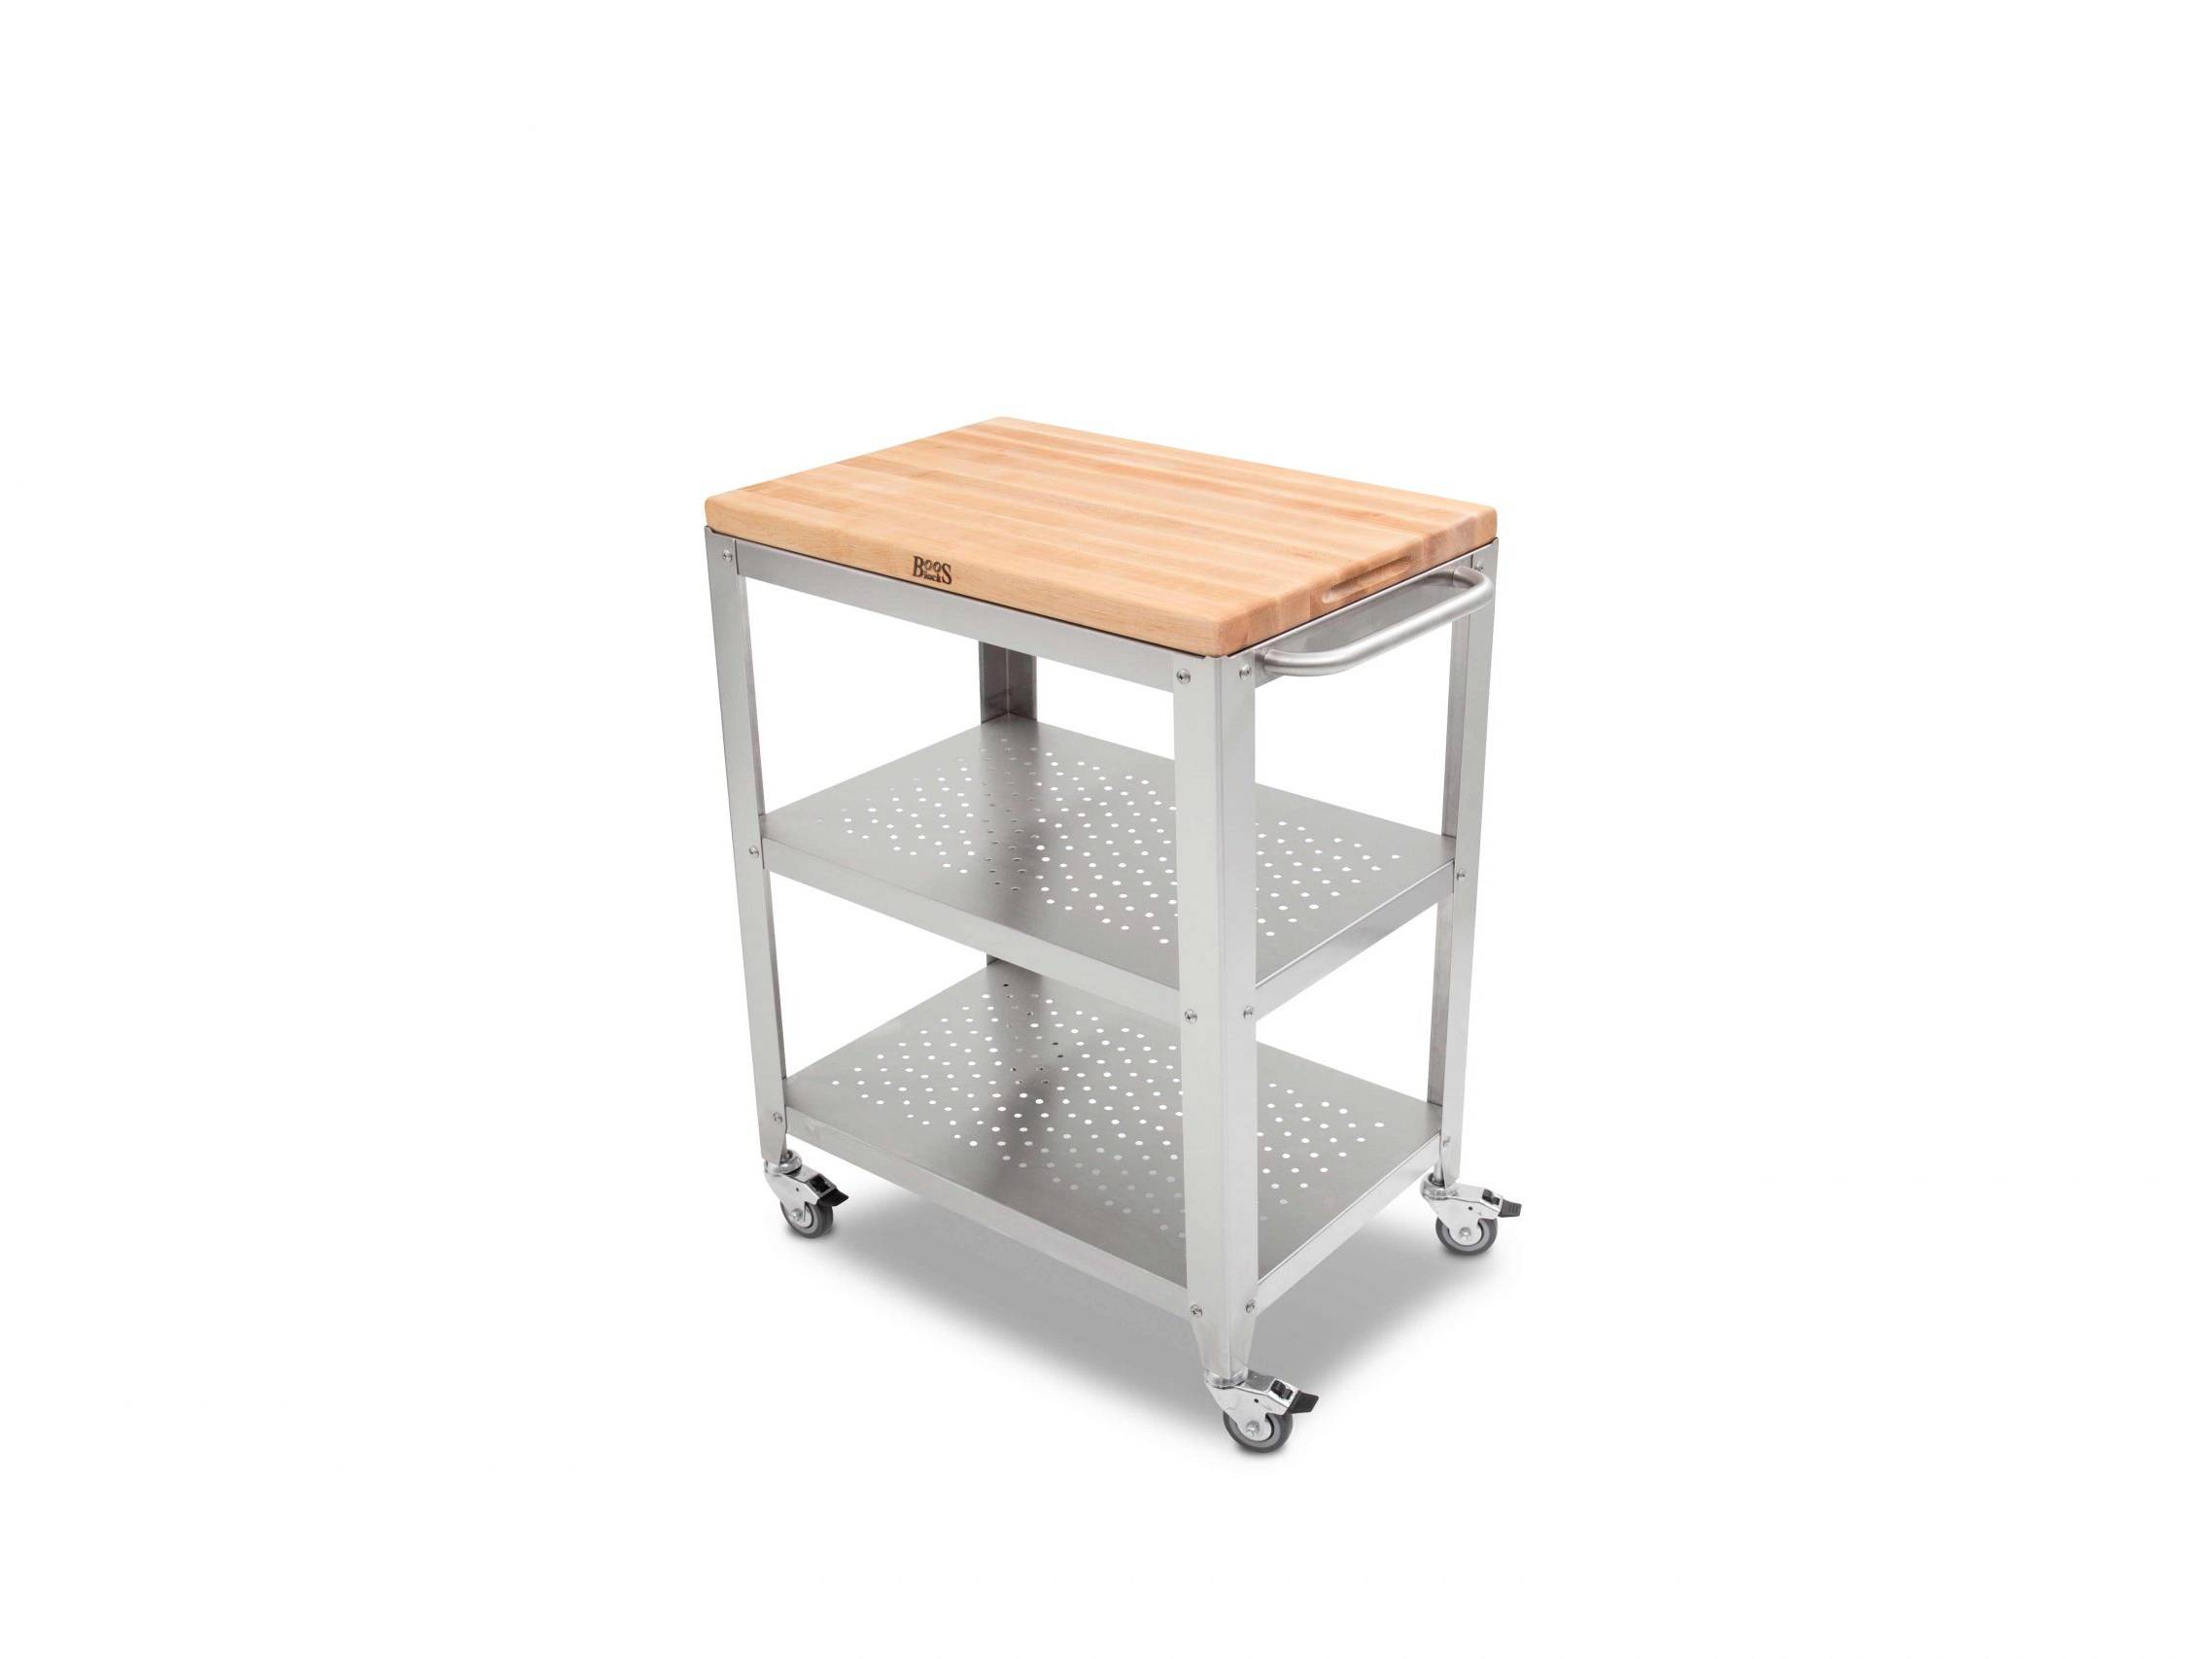 Culinarte Kitchen &amp; Serving Cart with Removable Hard Maple Long Wood Cutting Board; Stainless Steel Base with Drawer and 2 Shelves, Towel Holder; Lockable Casters 39